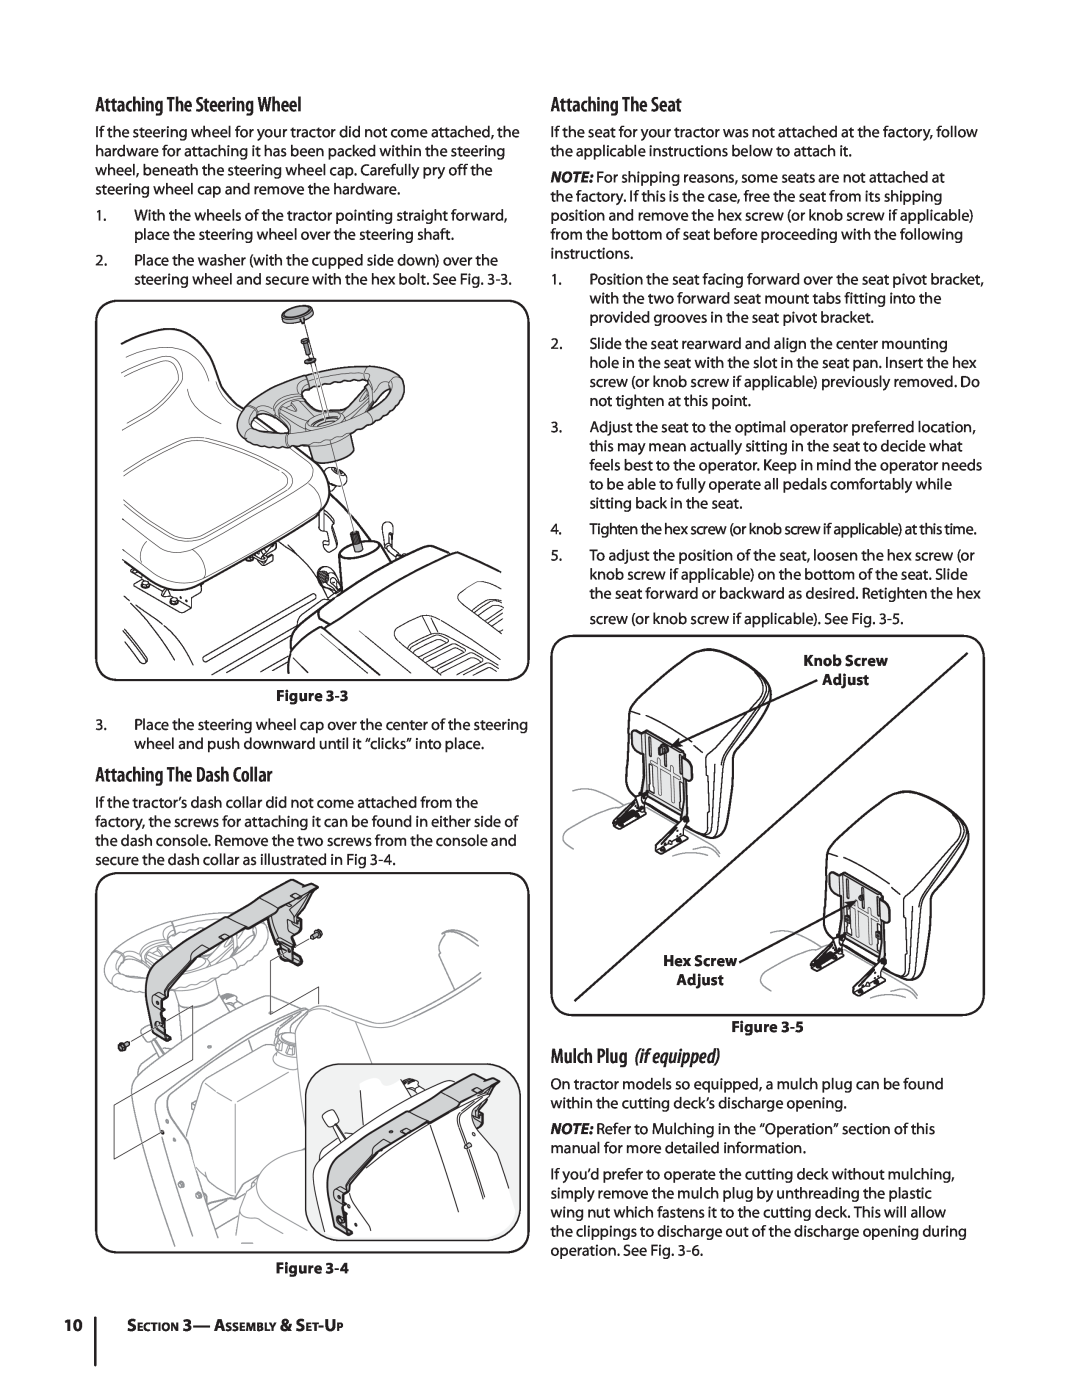 MTD 1438, 1842 warranty Attaching The Steering Wheel, Attaching The Dash Collar, Attaching The Seat, Mulch Plug if equipped 